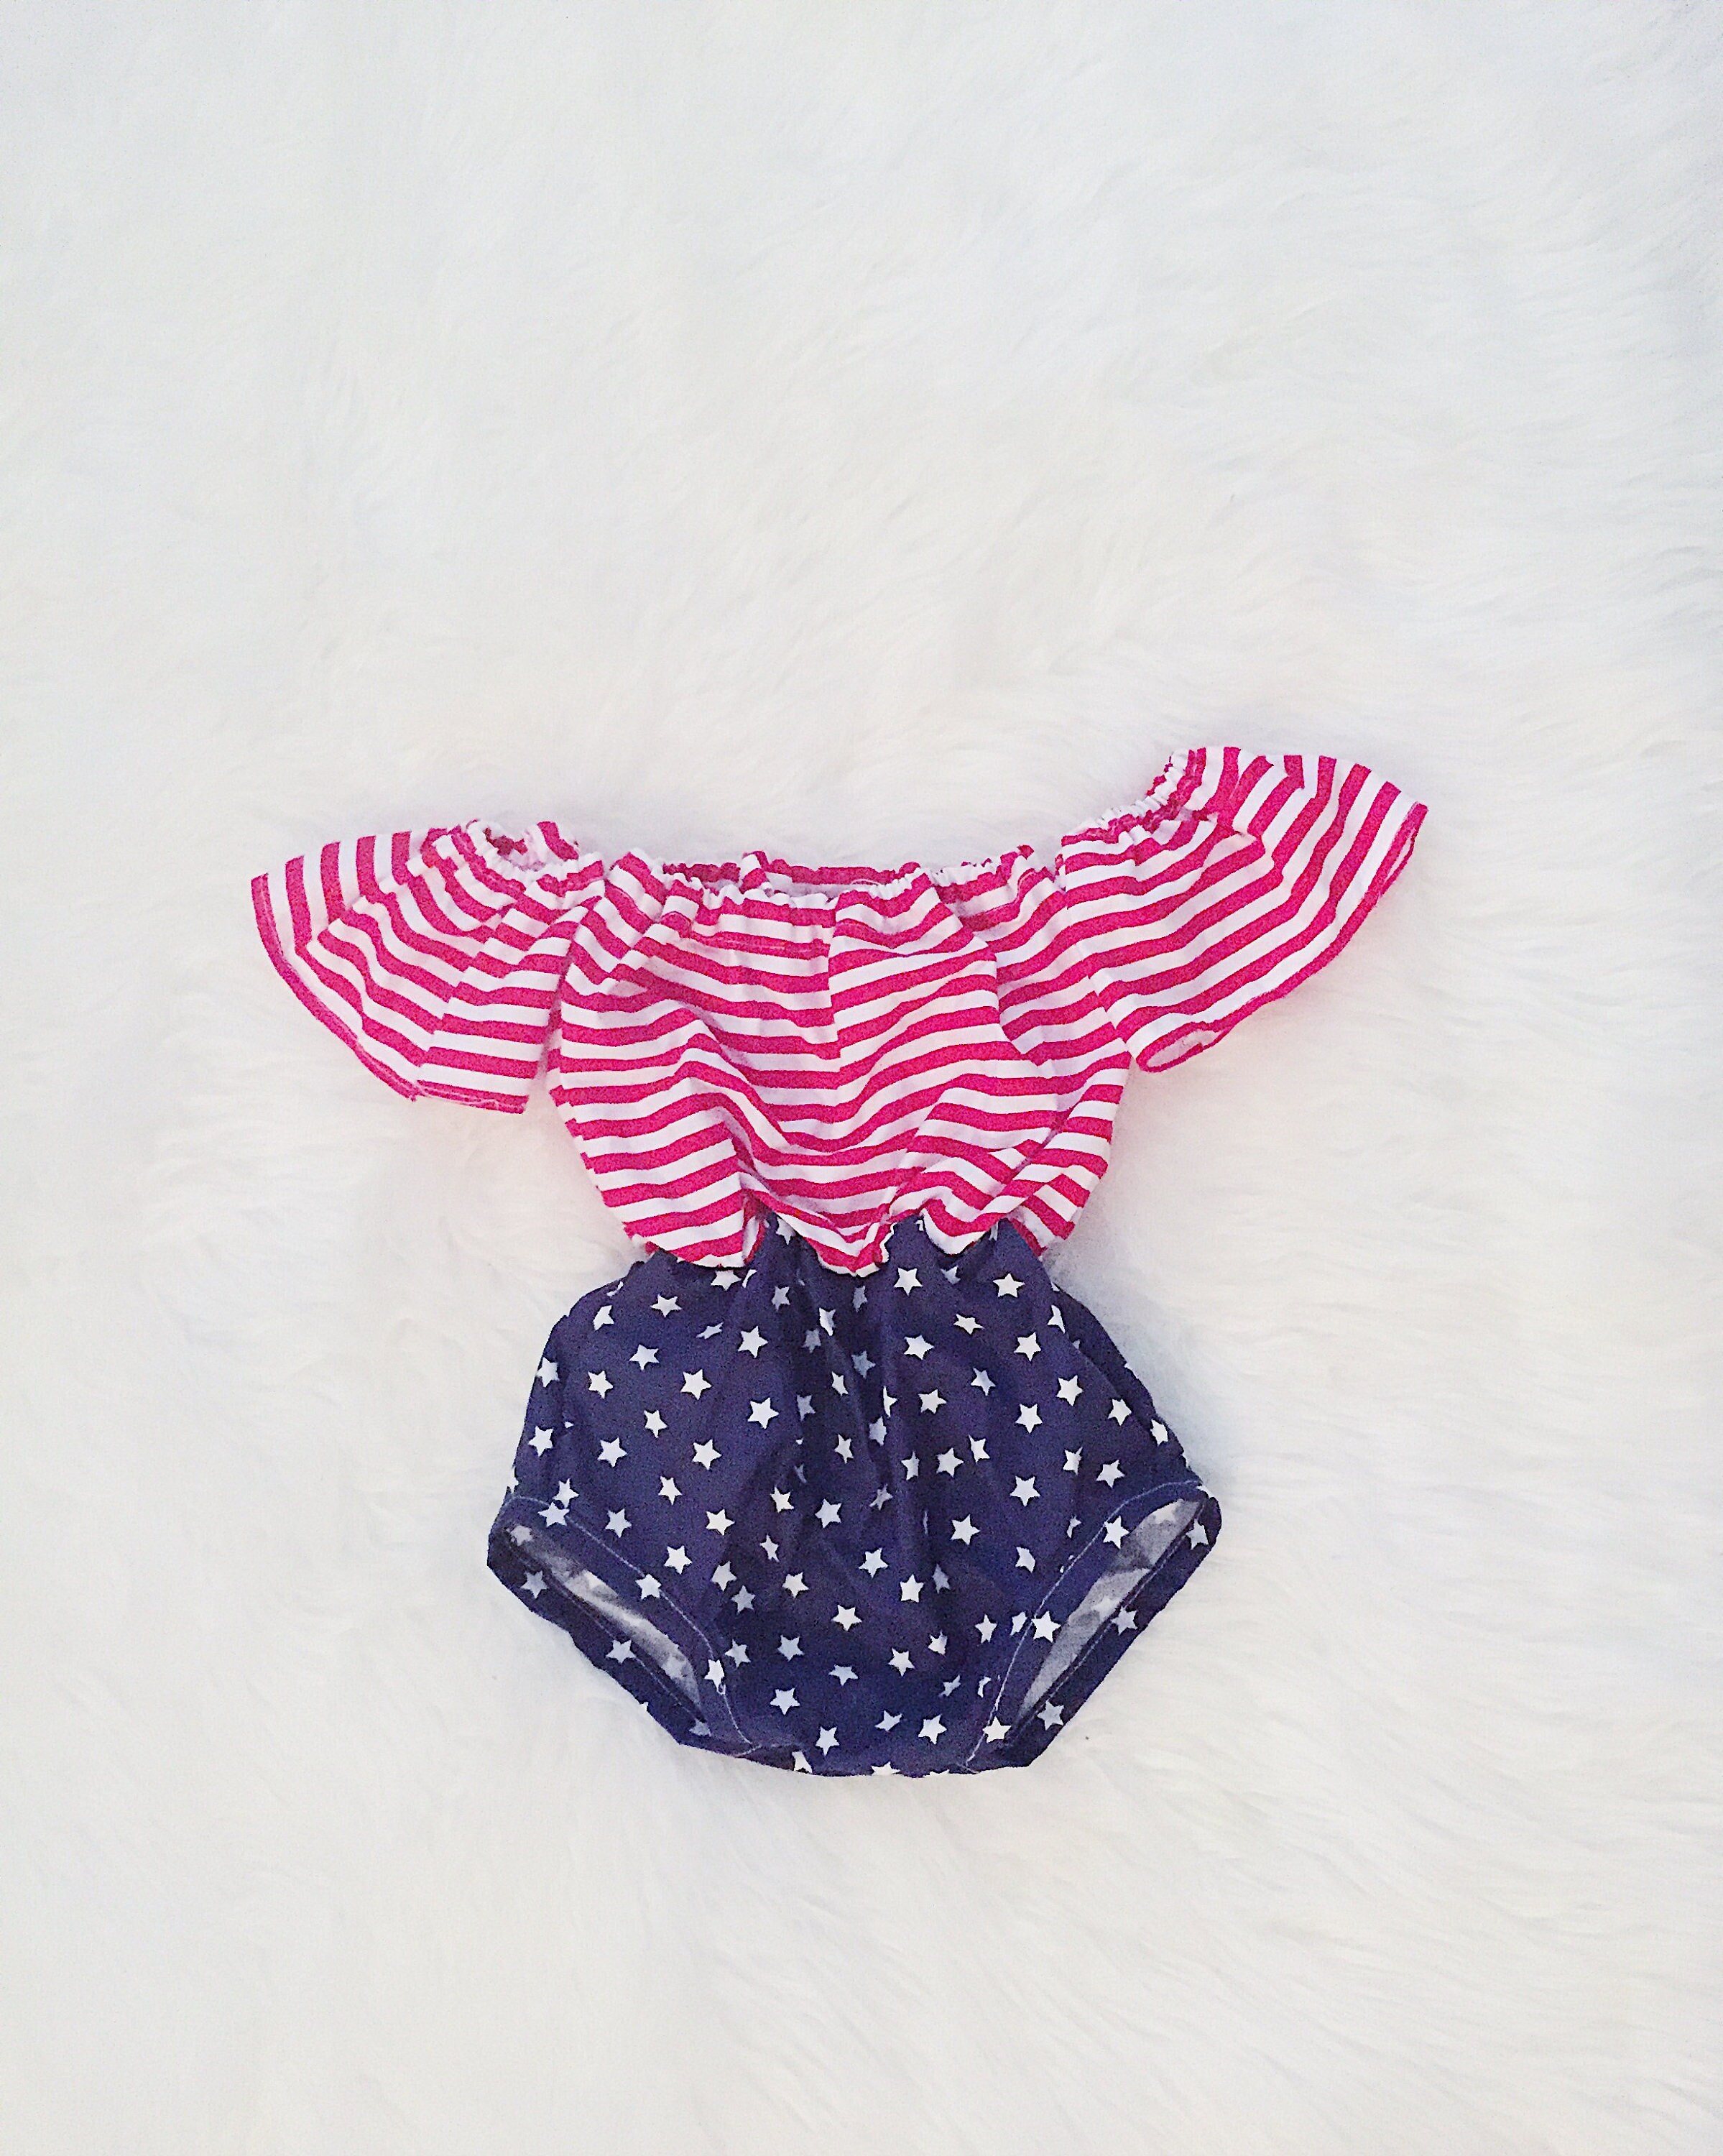 Baby Girl Clothes Baby Girl Romper Baby Girl Take Home - Etsy